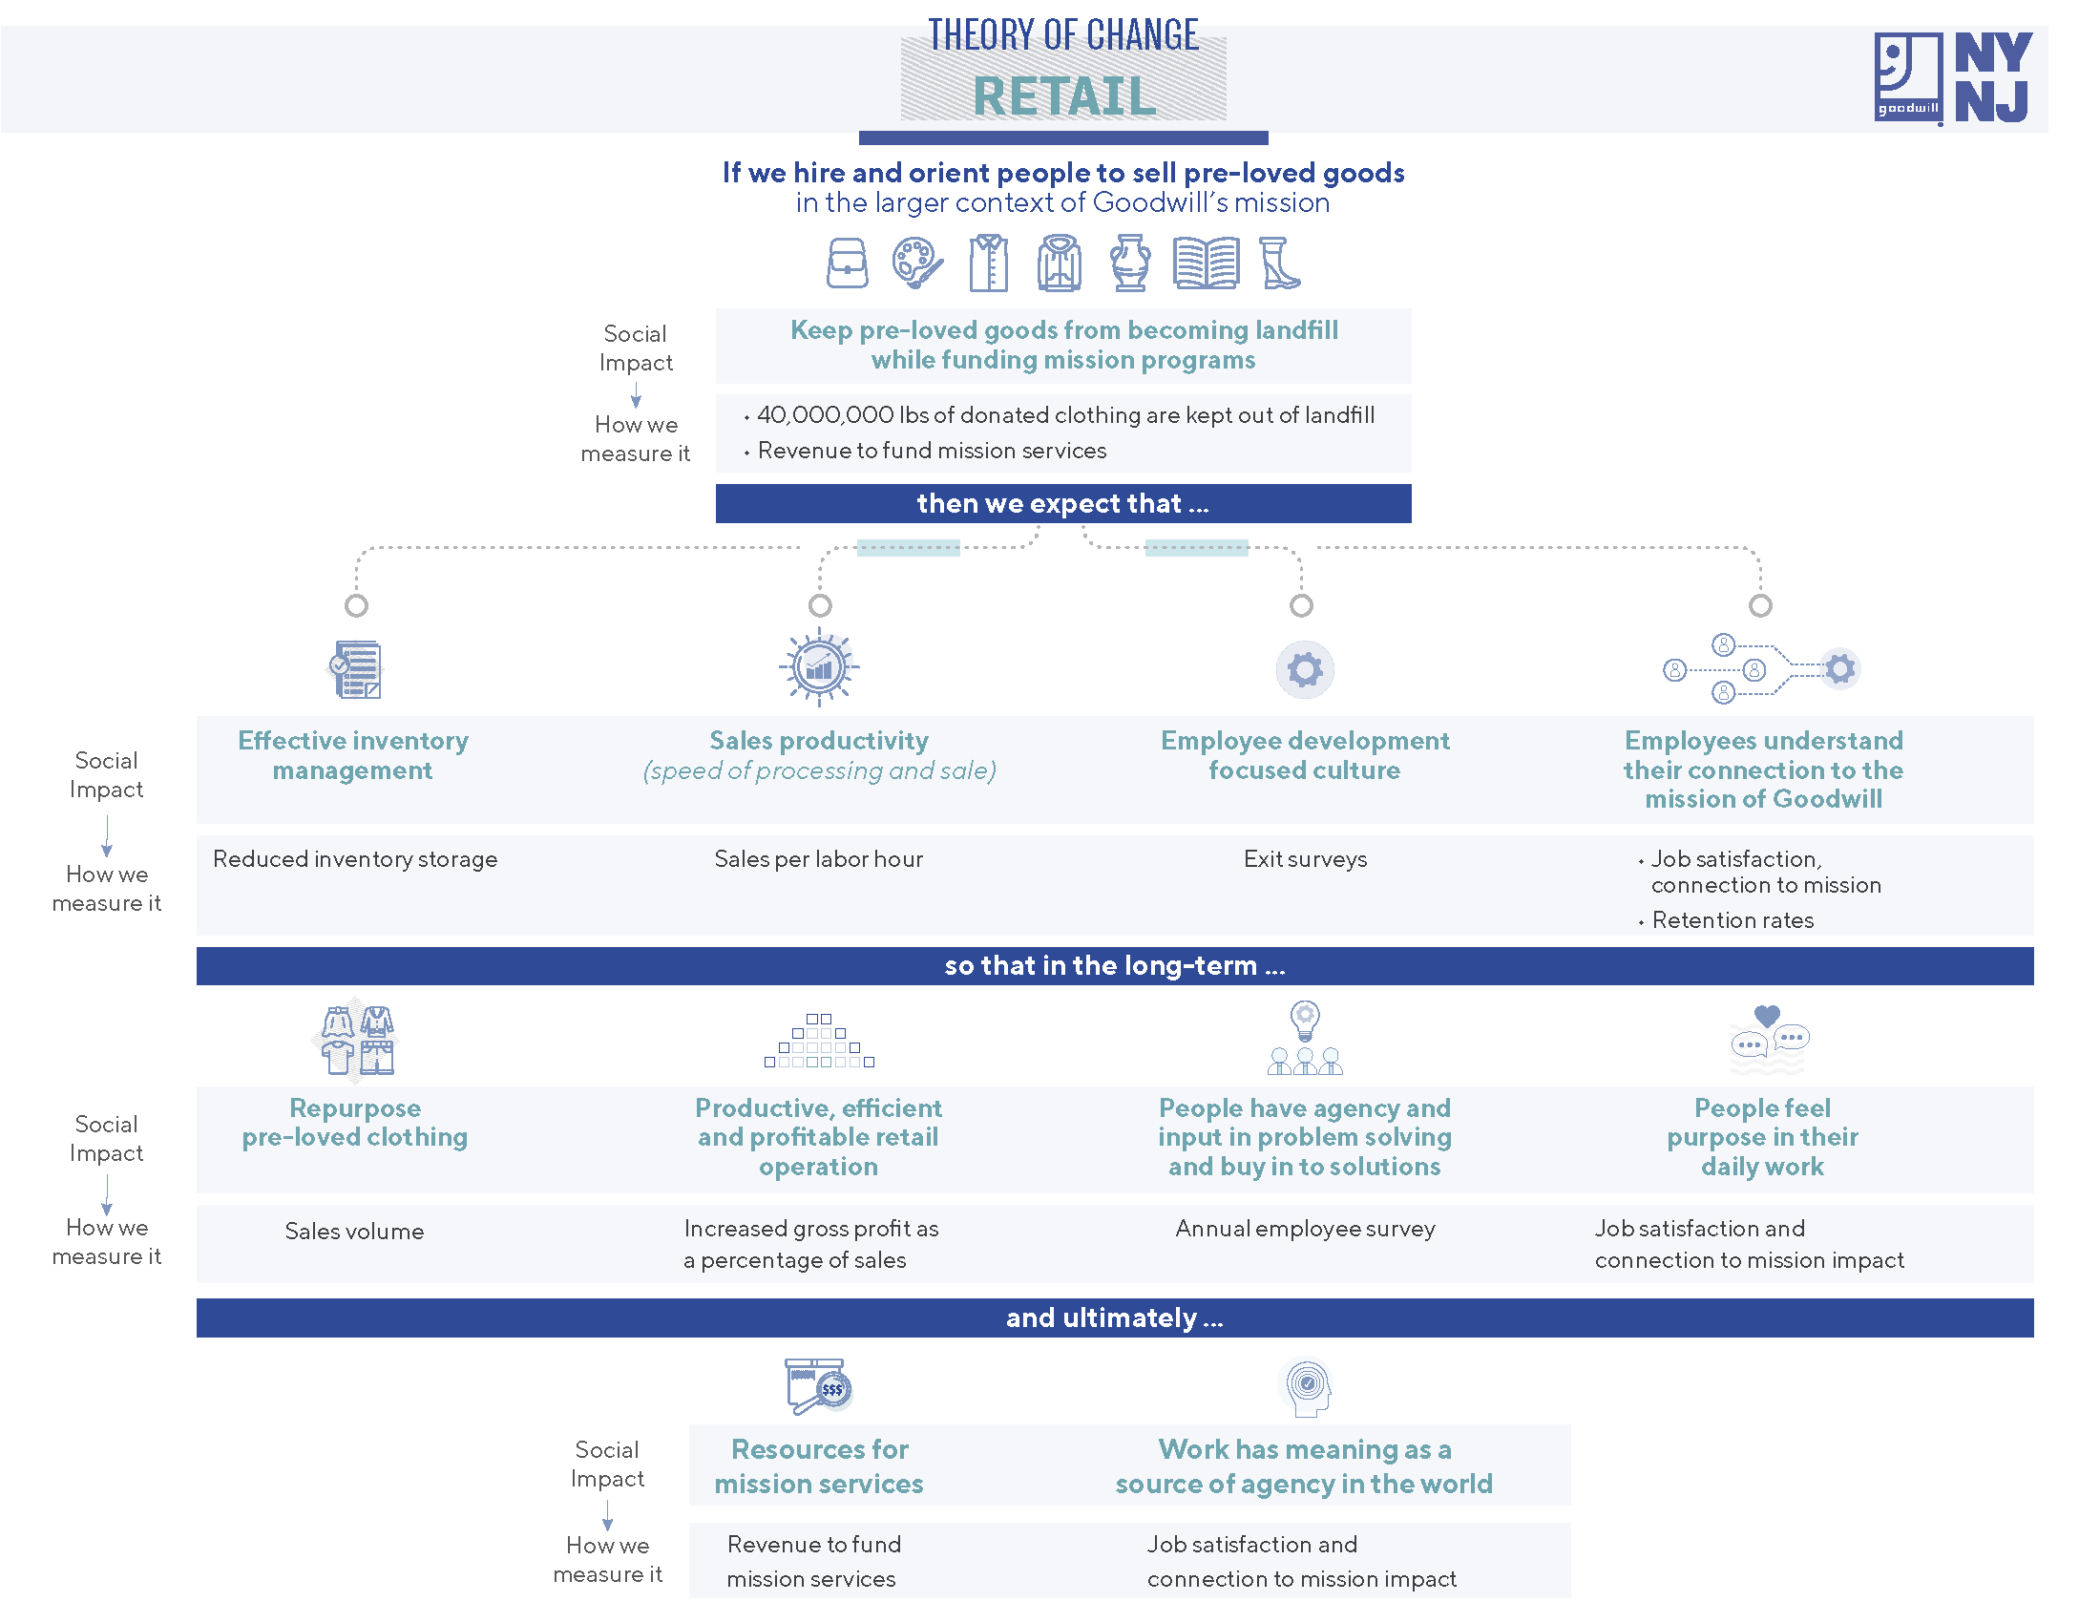 Creative Infographic Theory of Change Retail